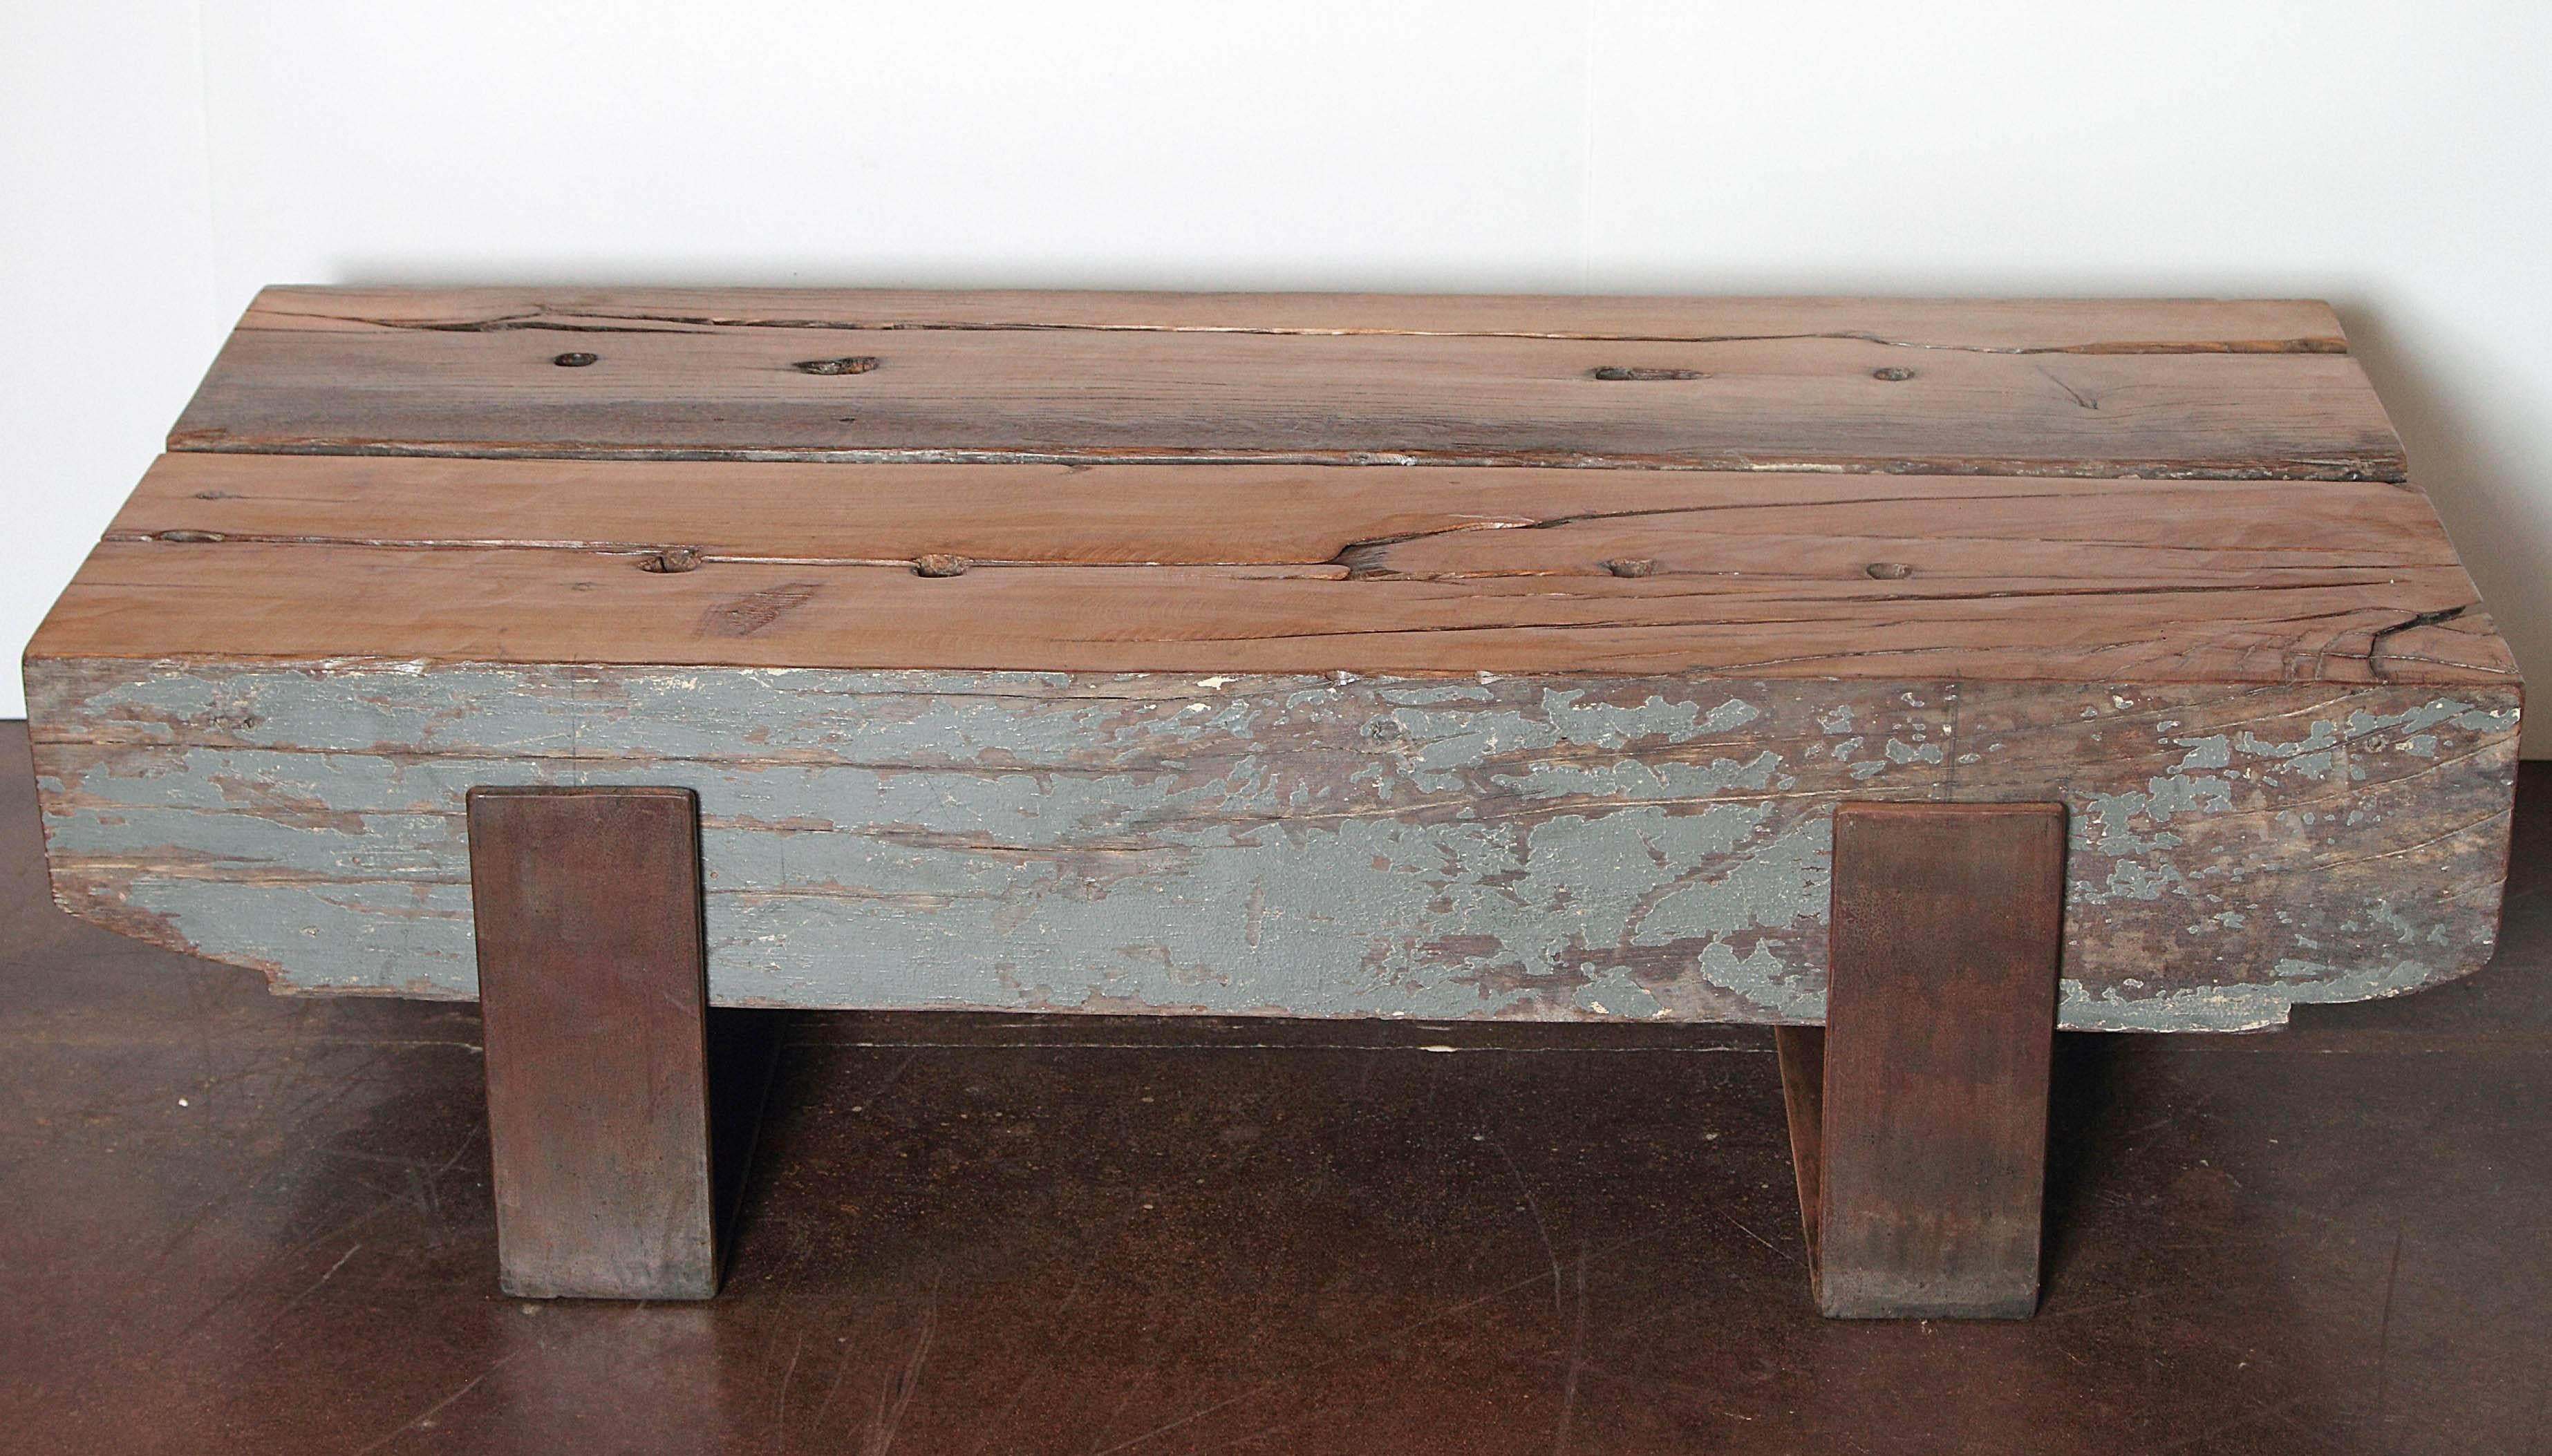 Patinated Antique French Architectural Elements as Modern Coffee Table